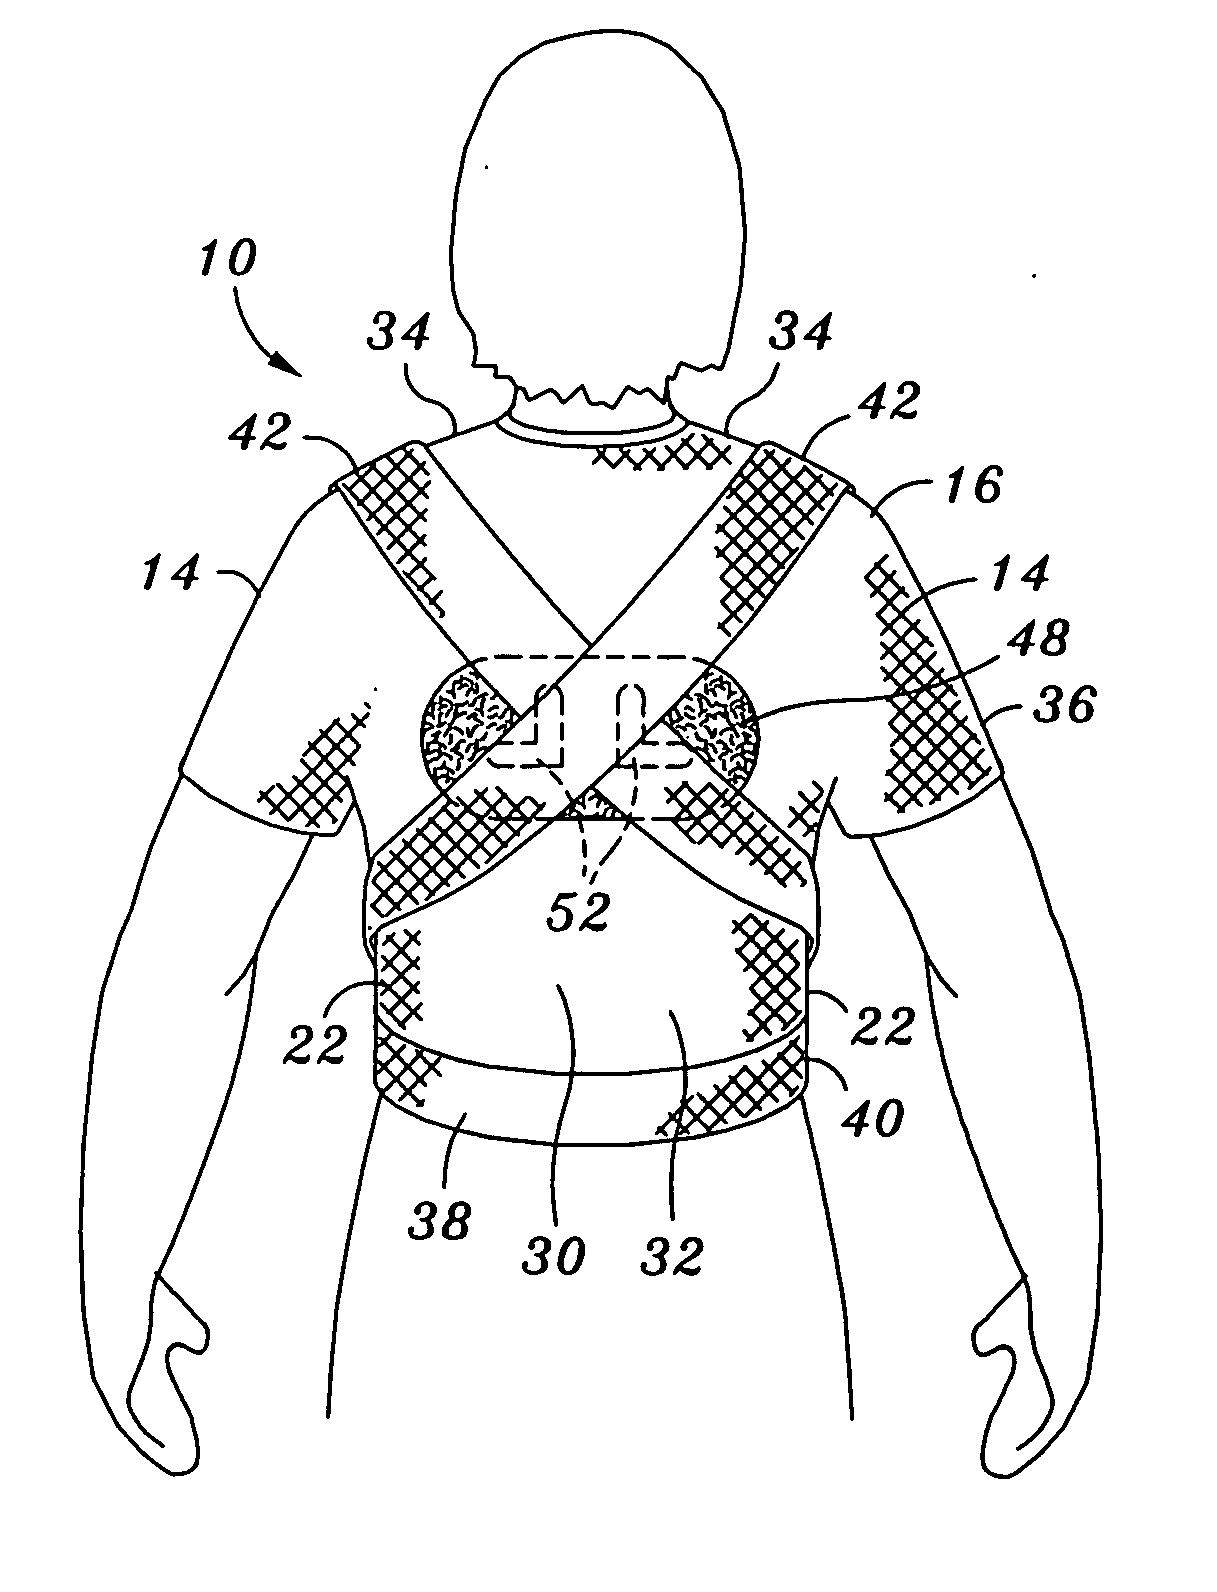 Posture improvement device and method of use